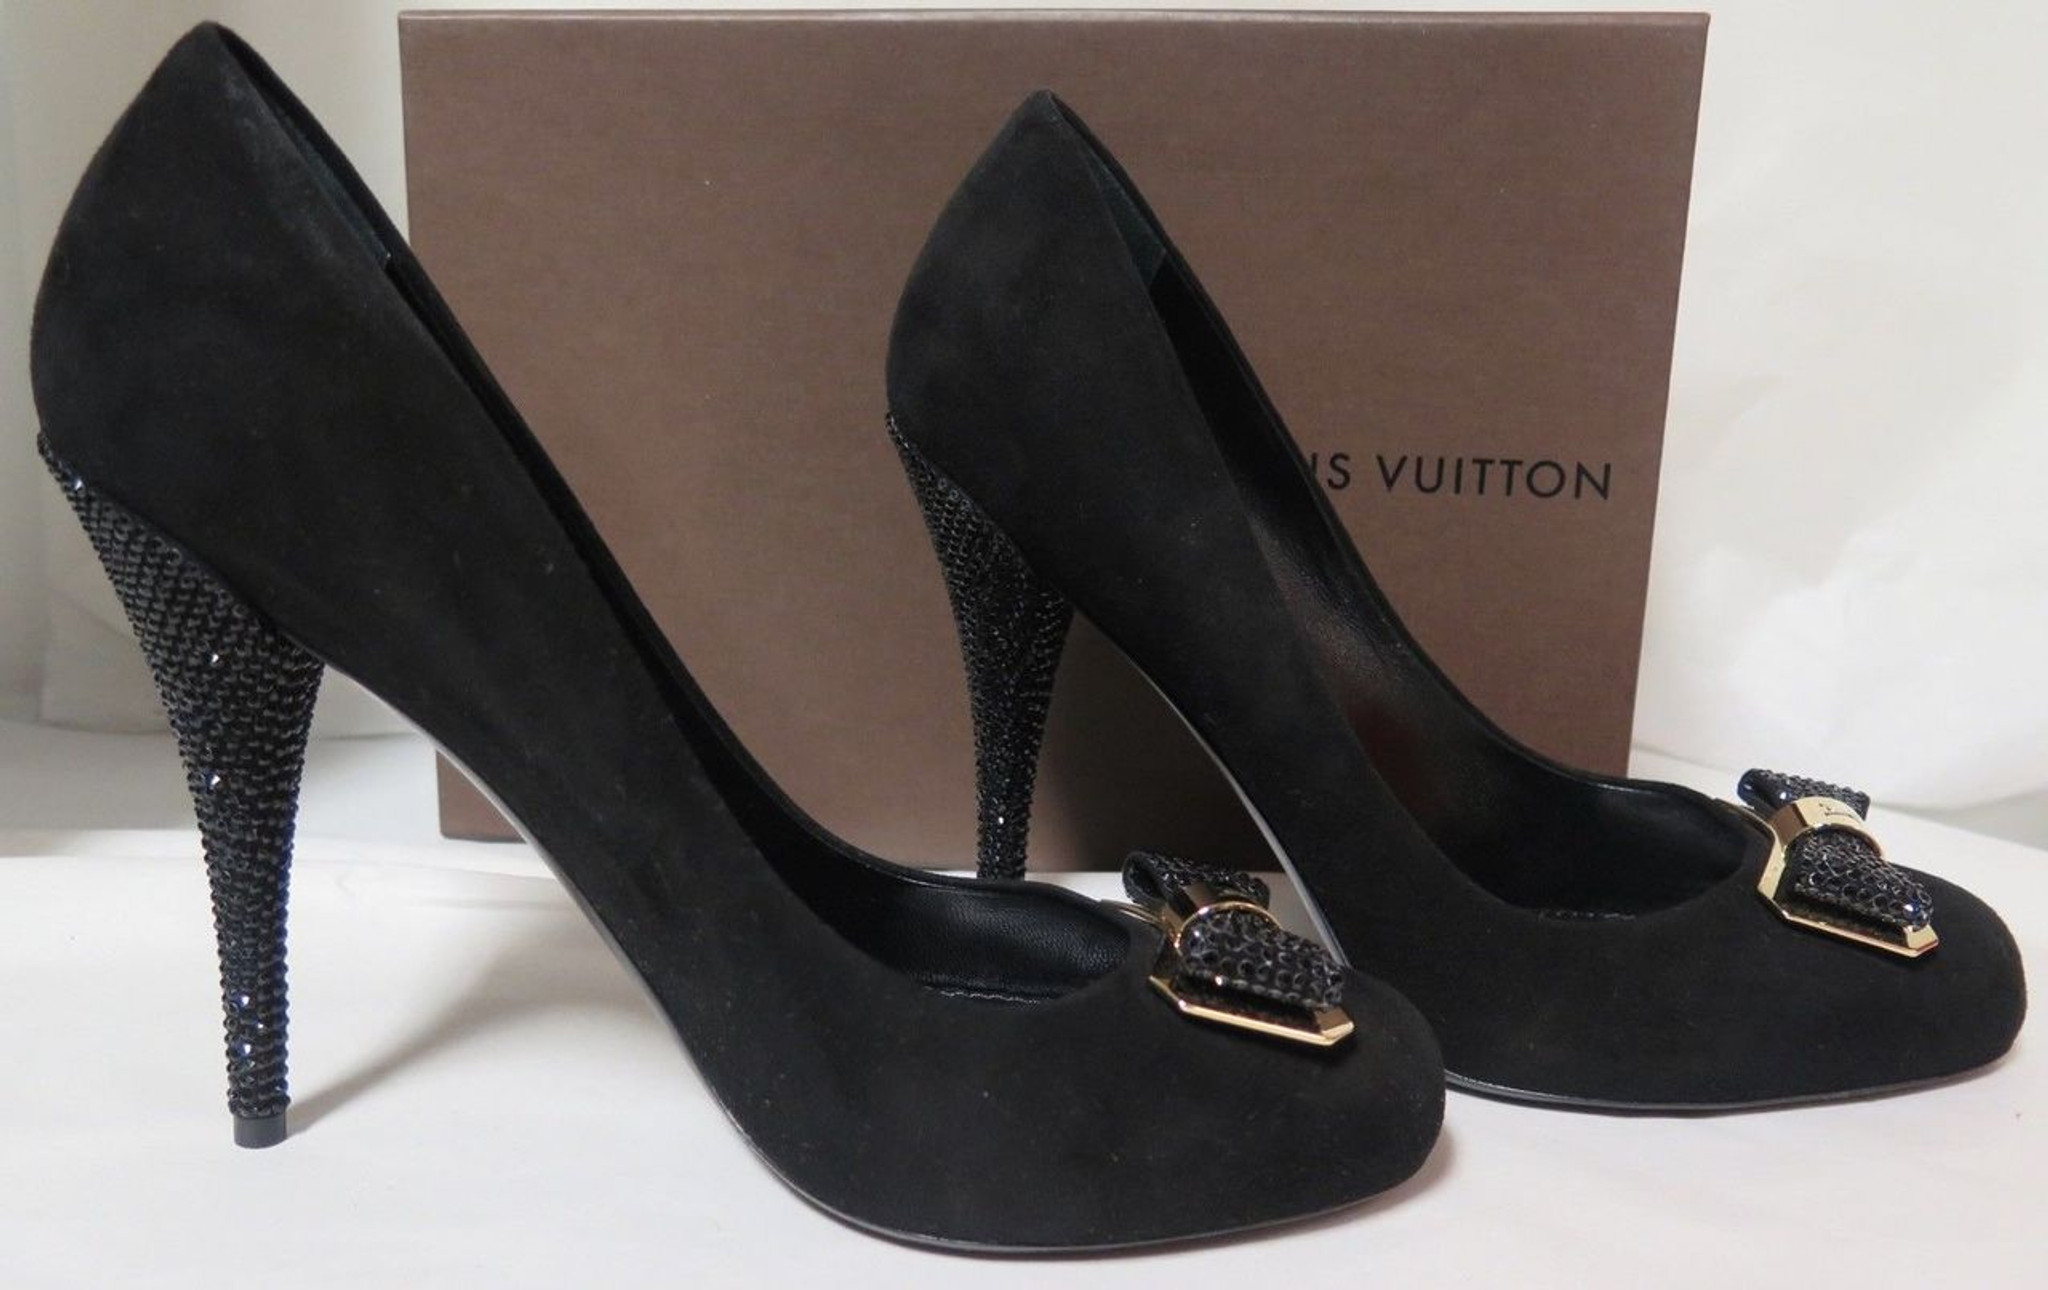 Auth Louis Vuitton Black 4.5 inch Crystal Heels in Size 39.5 Worn Once In  Box